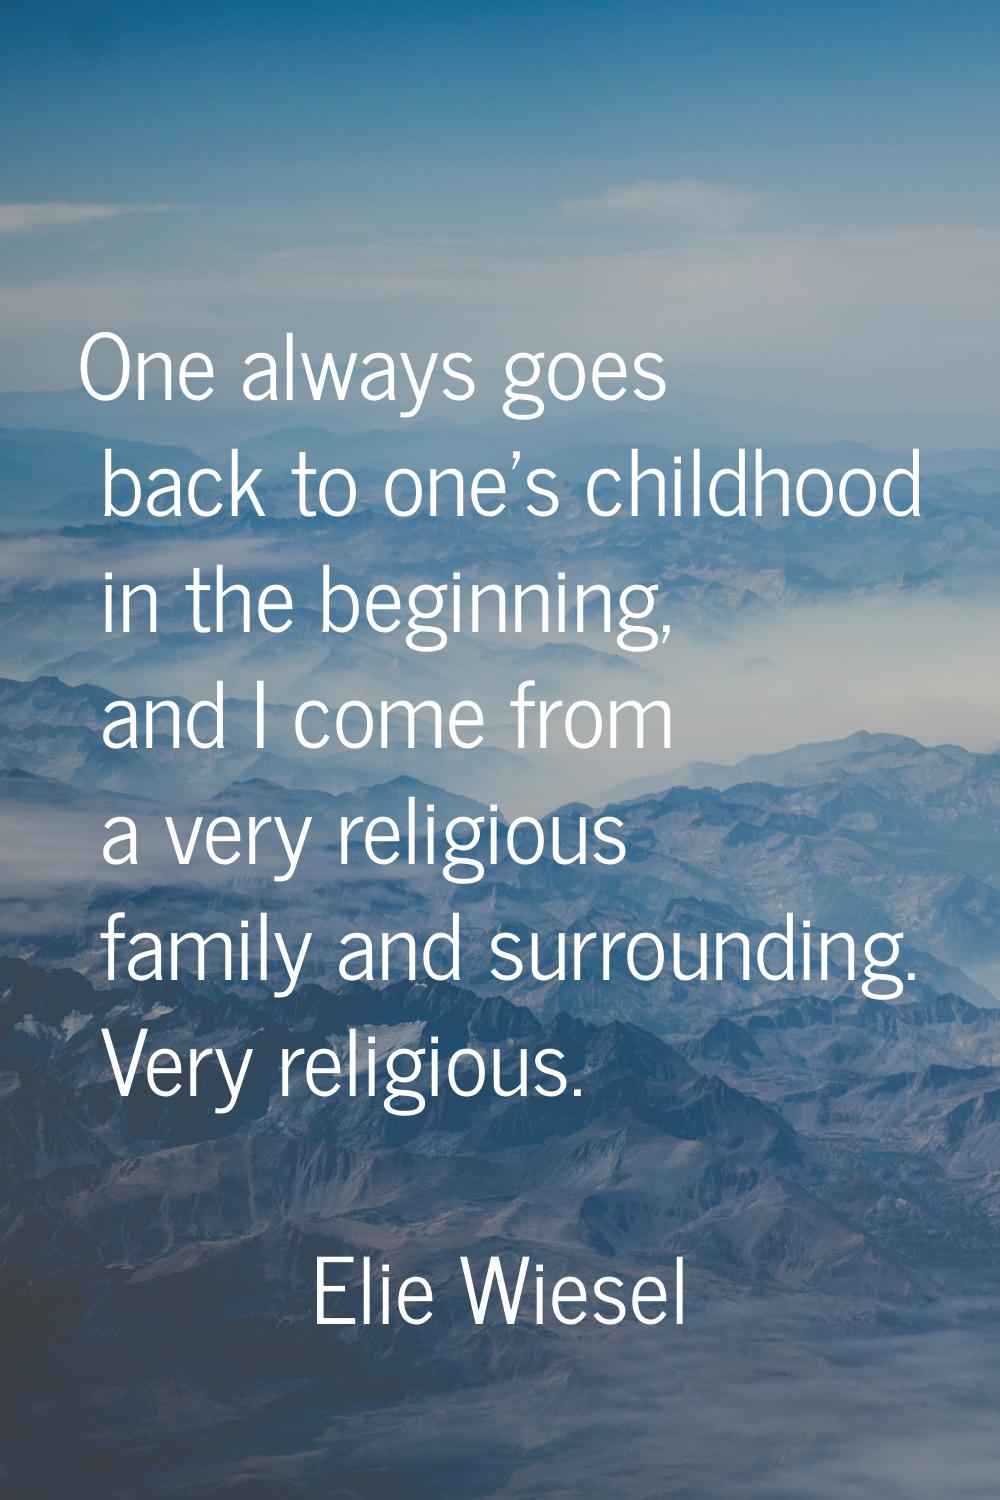 One always goes back to one's childhood in the beginning, and I come from a very religious family a